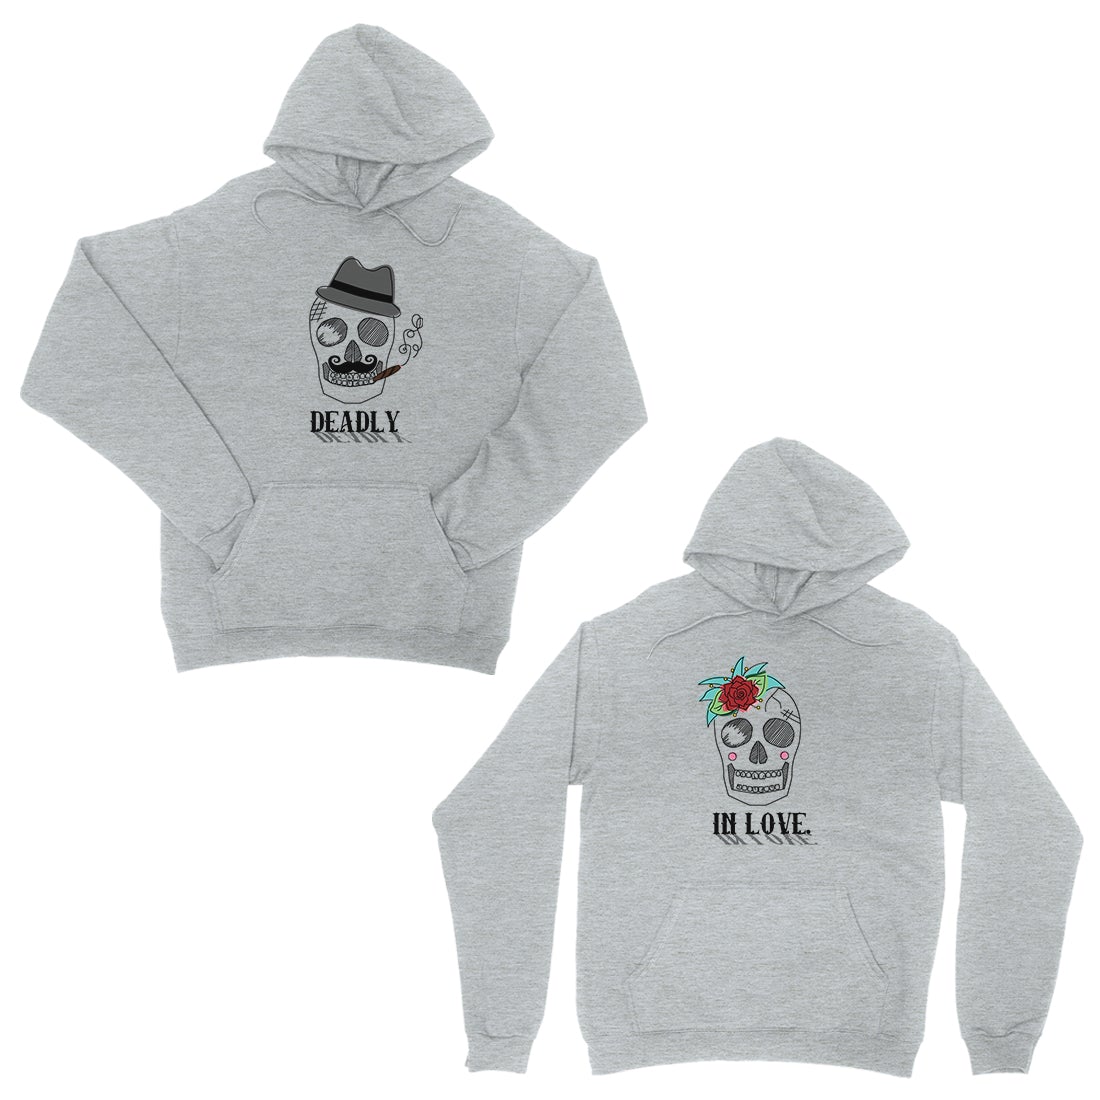 Deadly In Love Matching Hoodies Pullover Gray